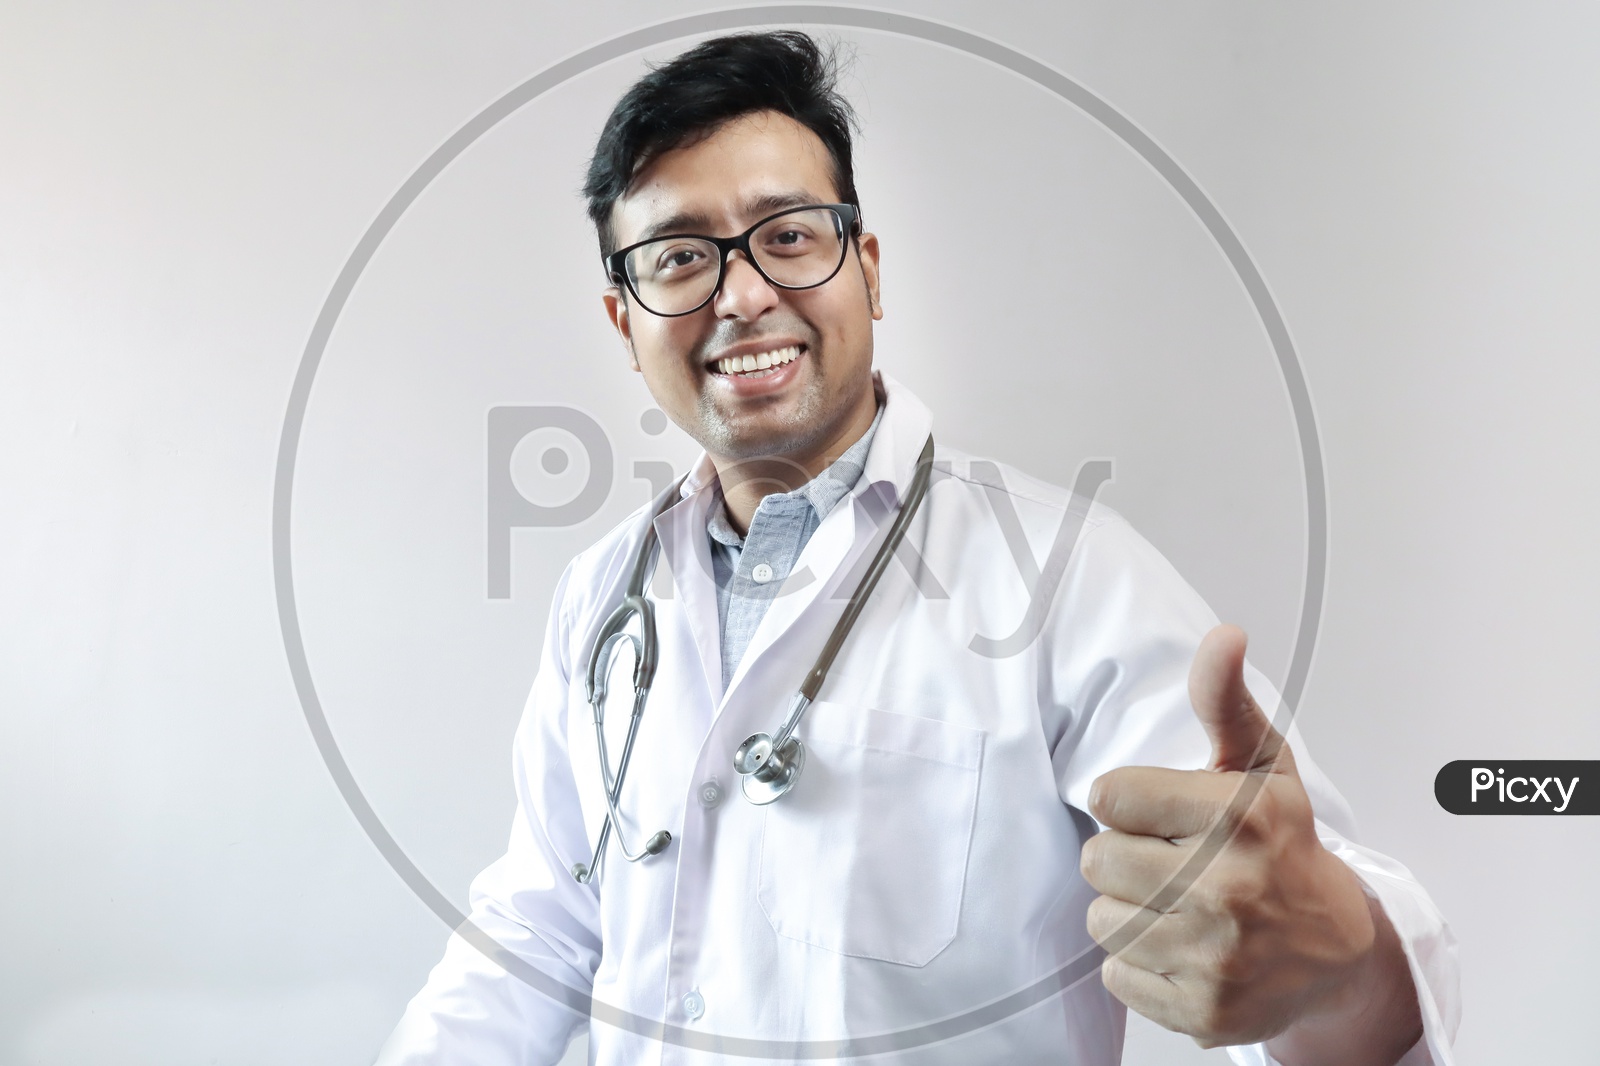 Male Indian Doctor In White Coat And Stethoscope Showing Thumbs Up With Smart Phone